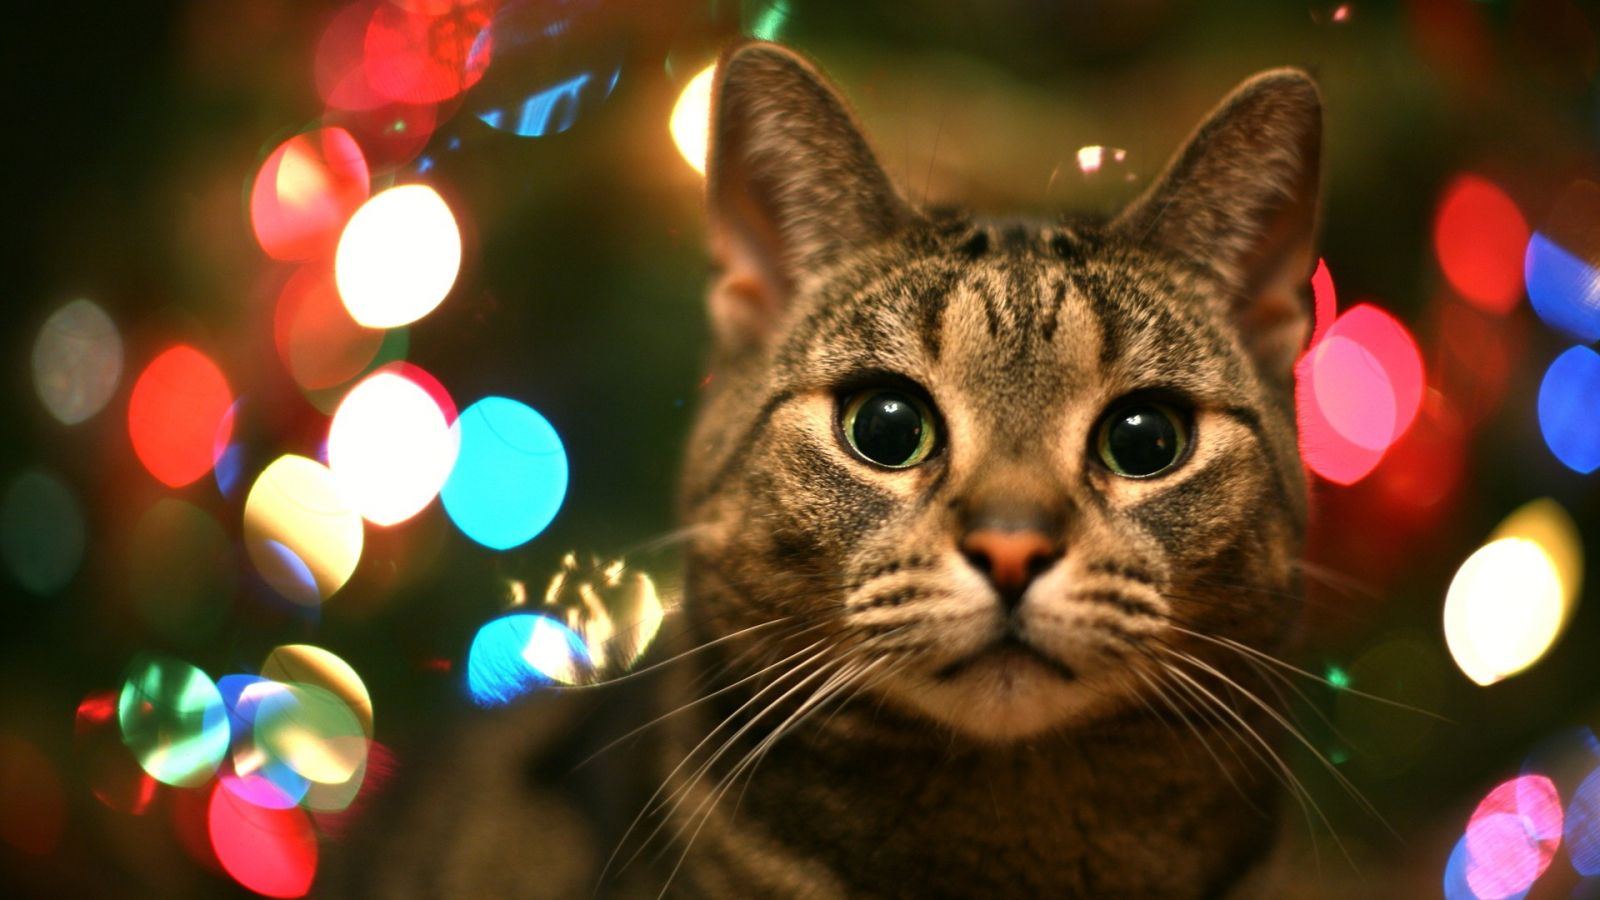 Free download Tabby Cat In Christmas Lights High Quality WallpaperWallpaper [1920x1080] for your Desktop, Mobile & Tablet. Explore Christmas Cat Wallpaper. Free Cat Wallpaper For Desktop, Kitten Wallpaper Free